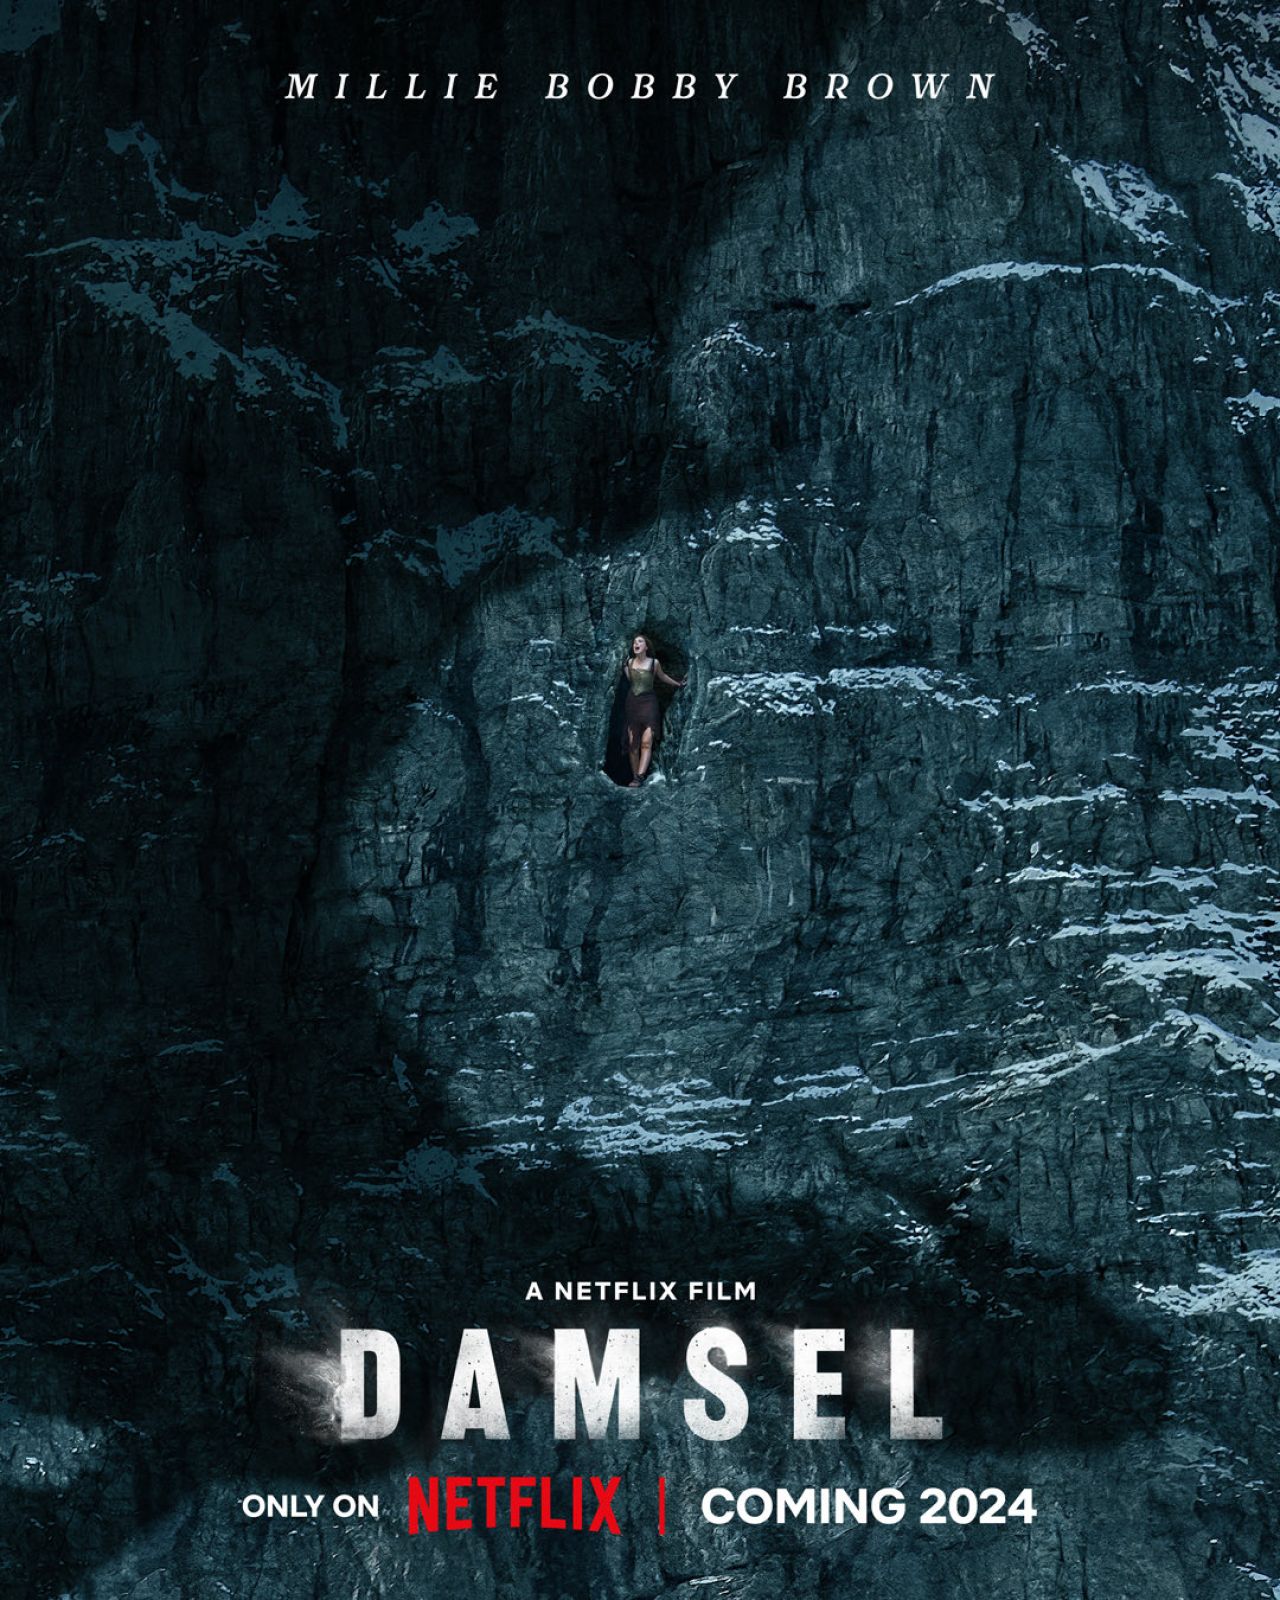 Millie Bobby Brown "Damsel" (2024) Posters and Trailer • CelebMafia